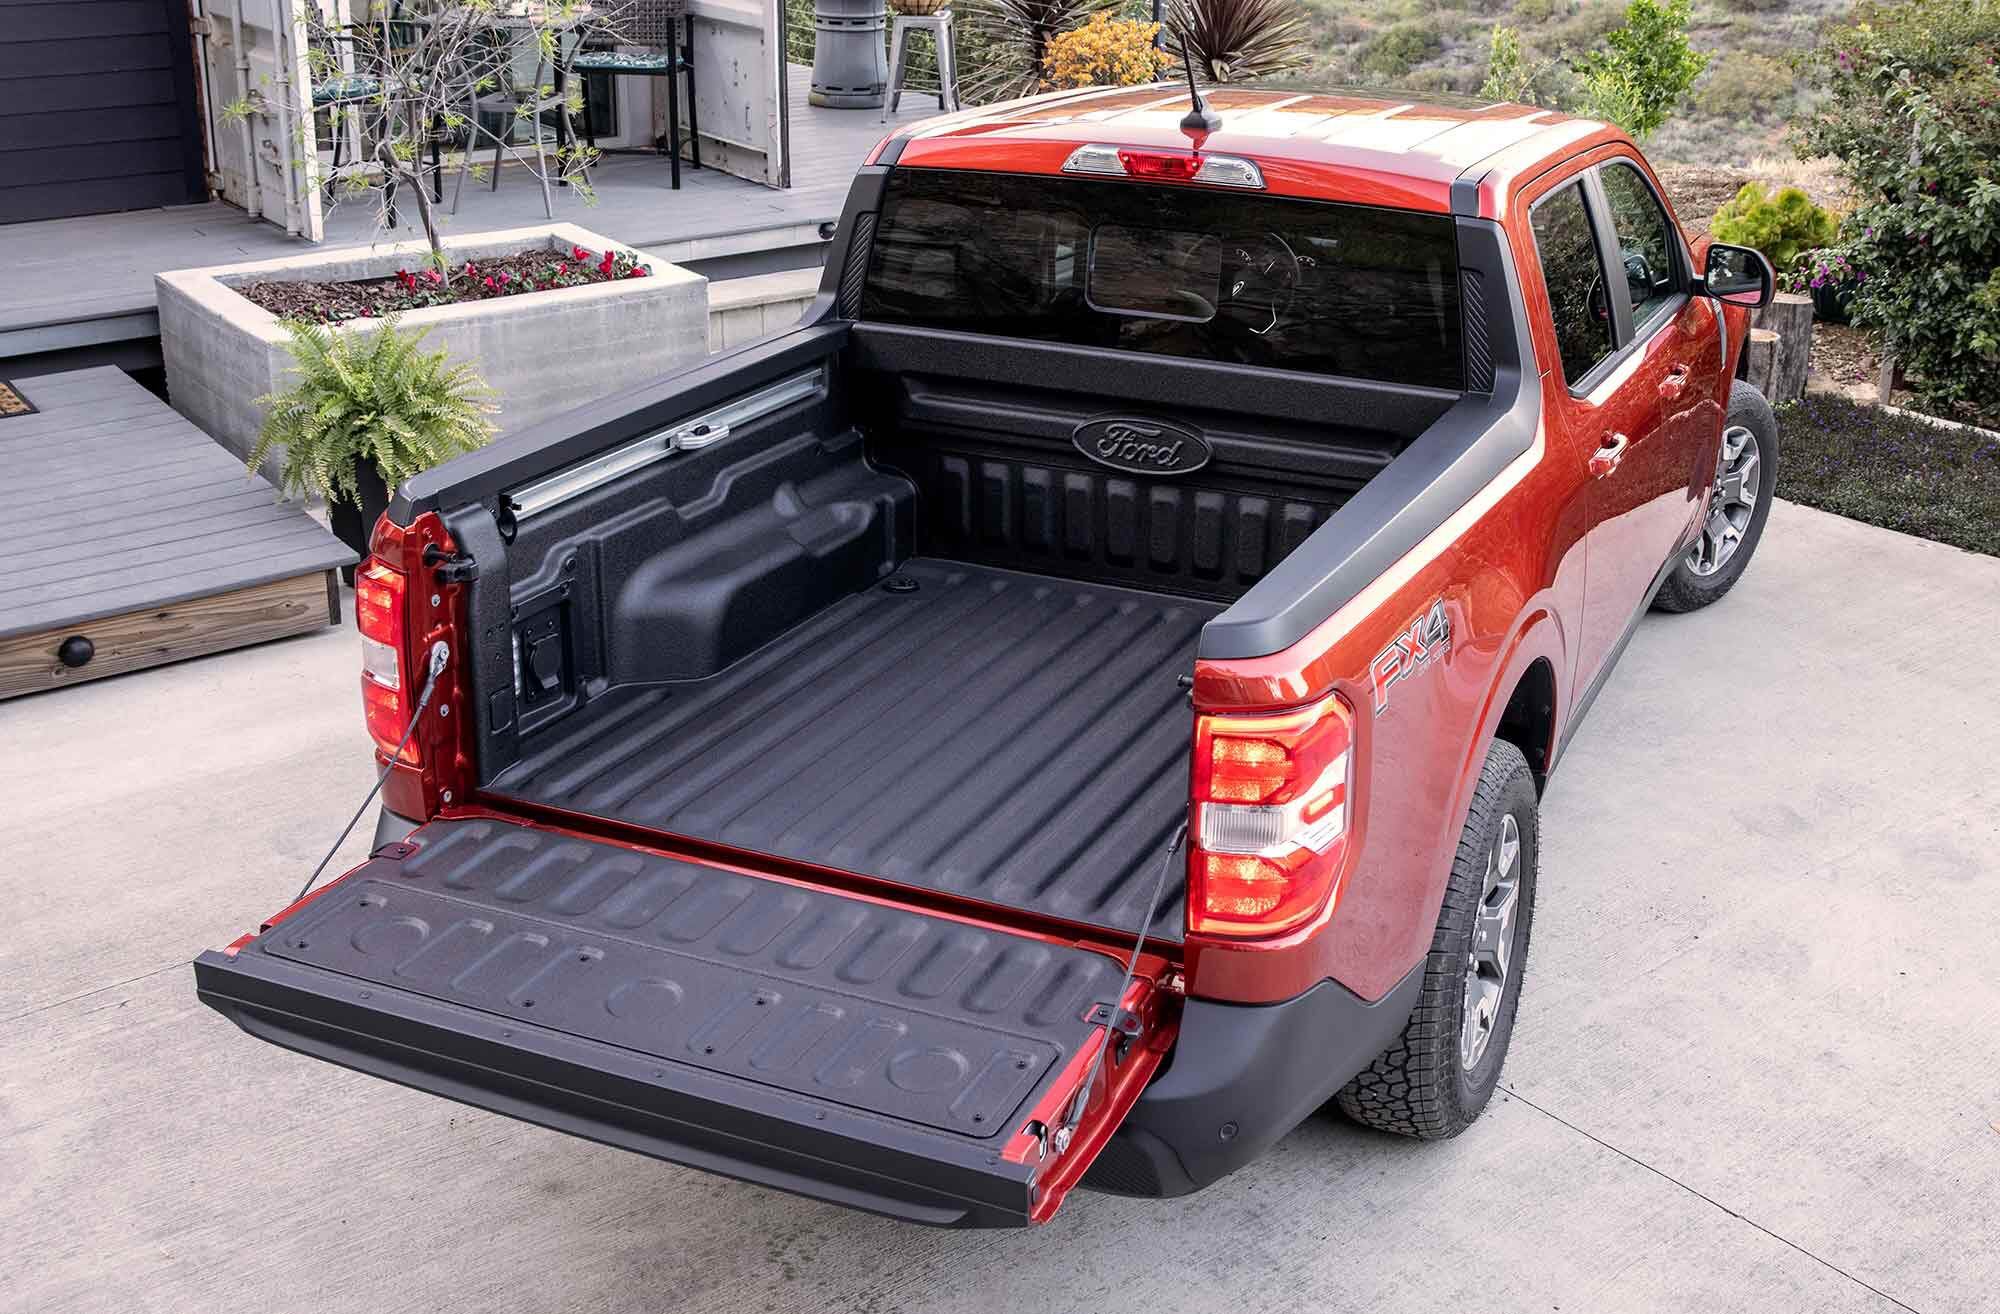 The Ford Maverick’s FlexBed offers creative and useful ways to carry your cargo in a pint-sized space.